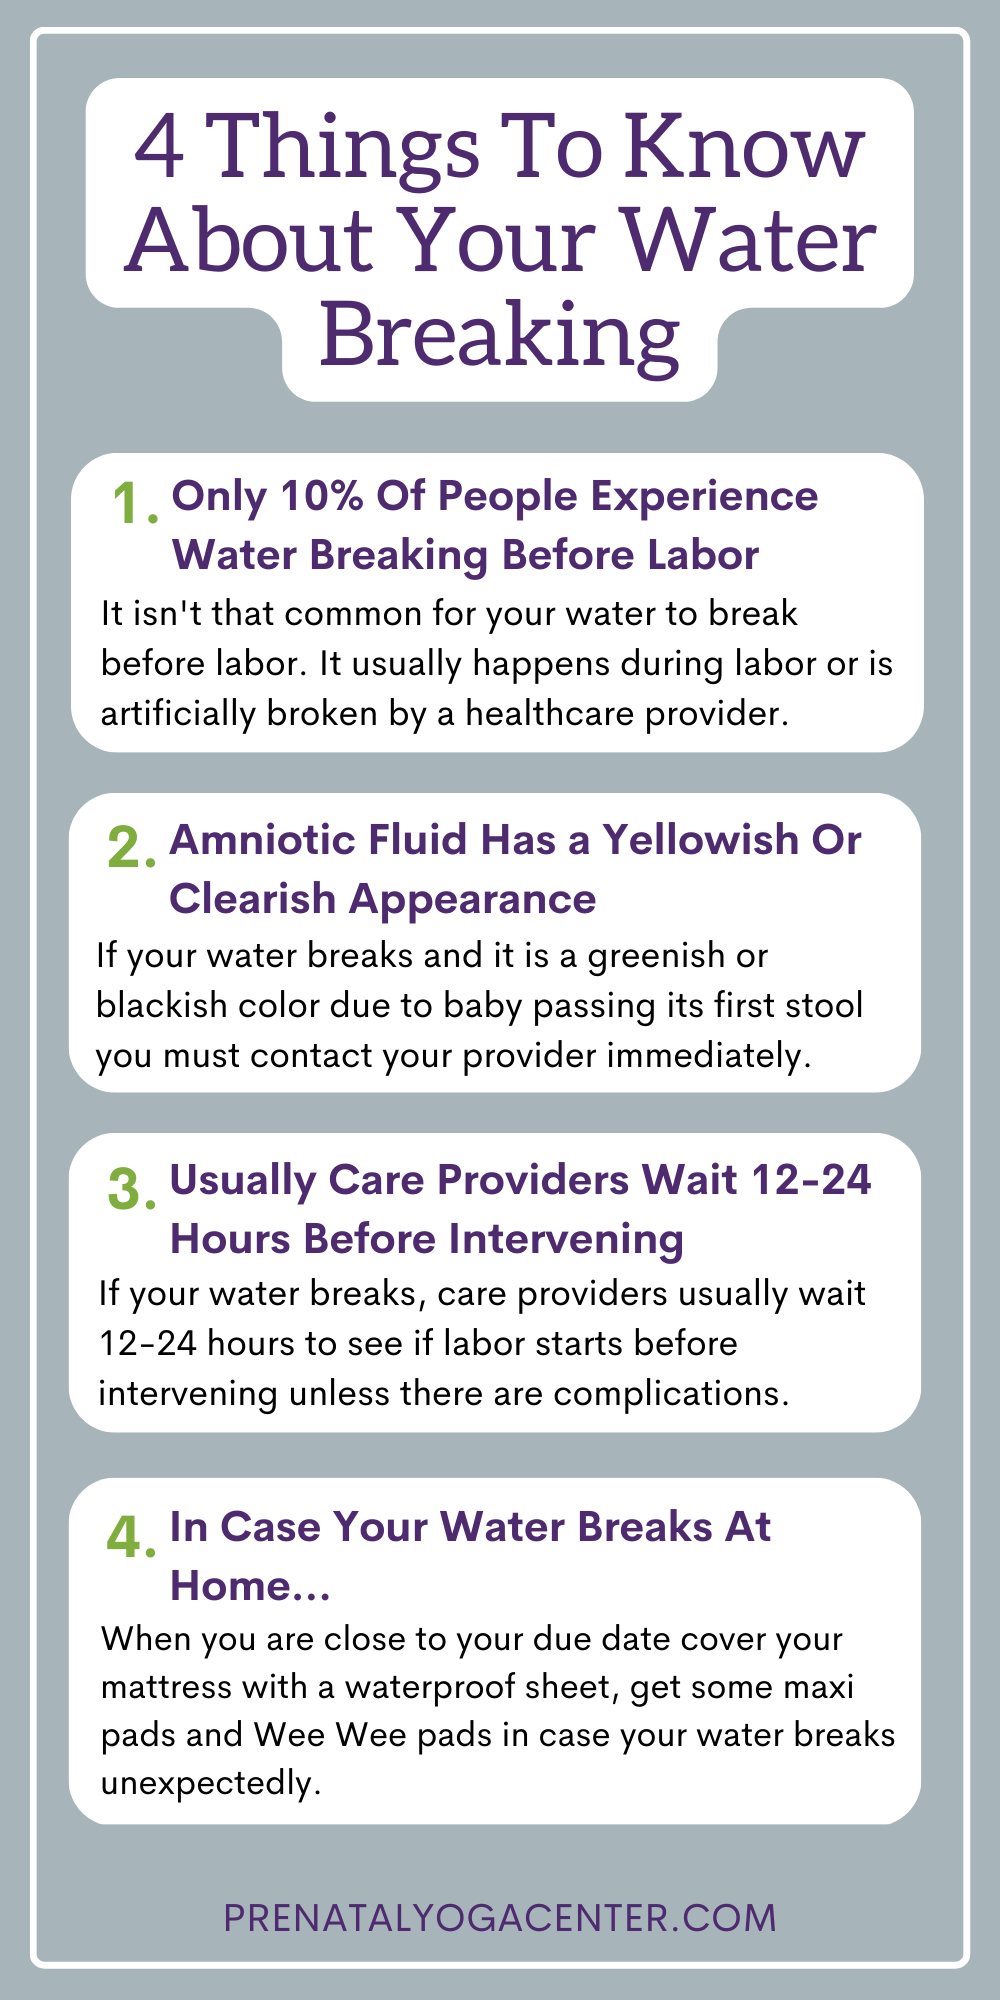 Leaking amniotic fluid: Signs and what to do